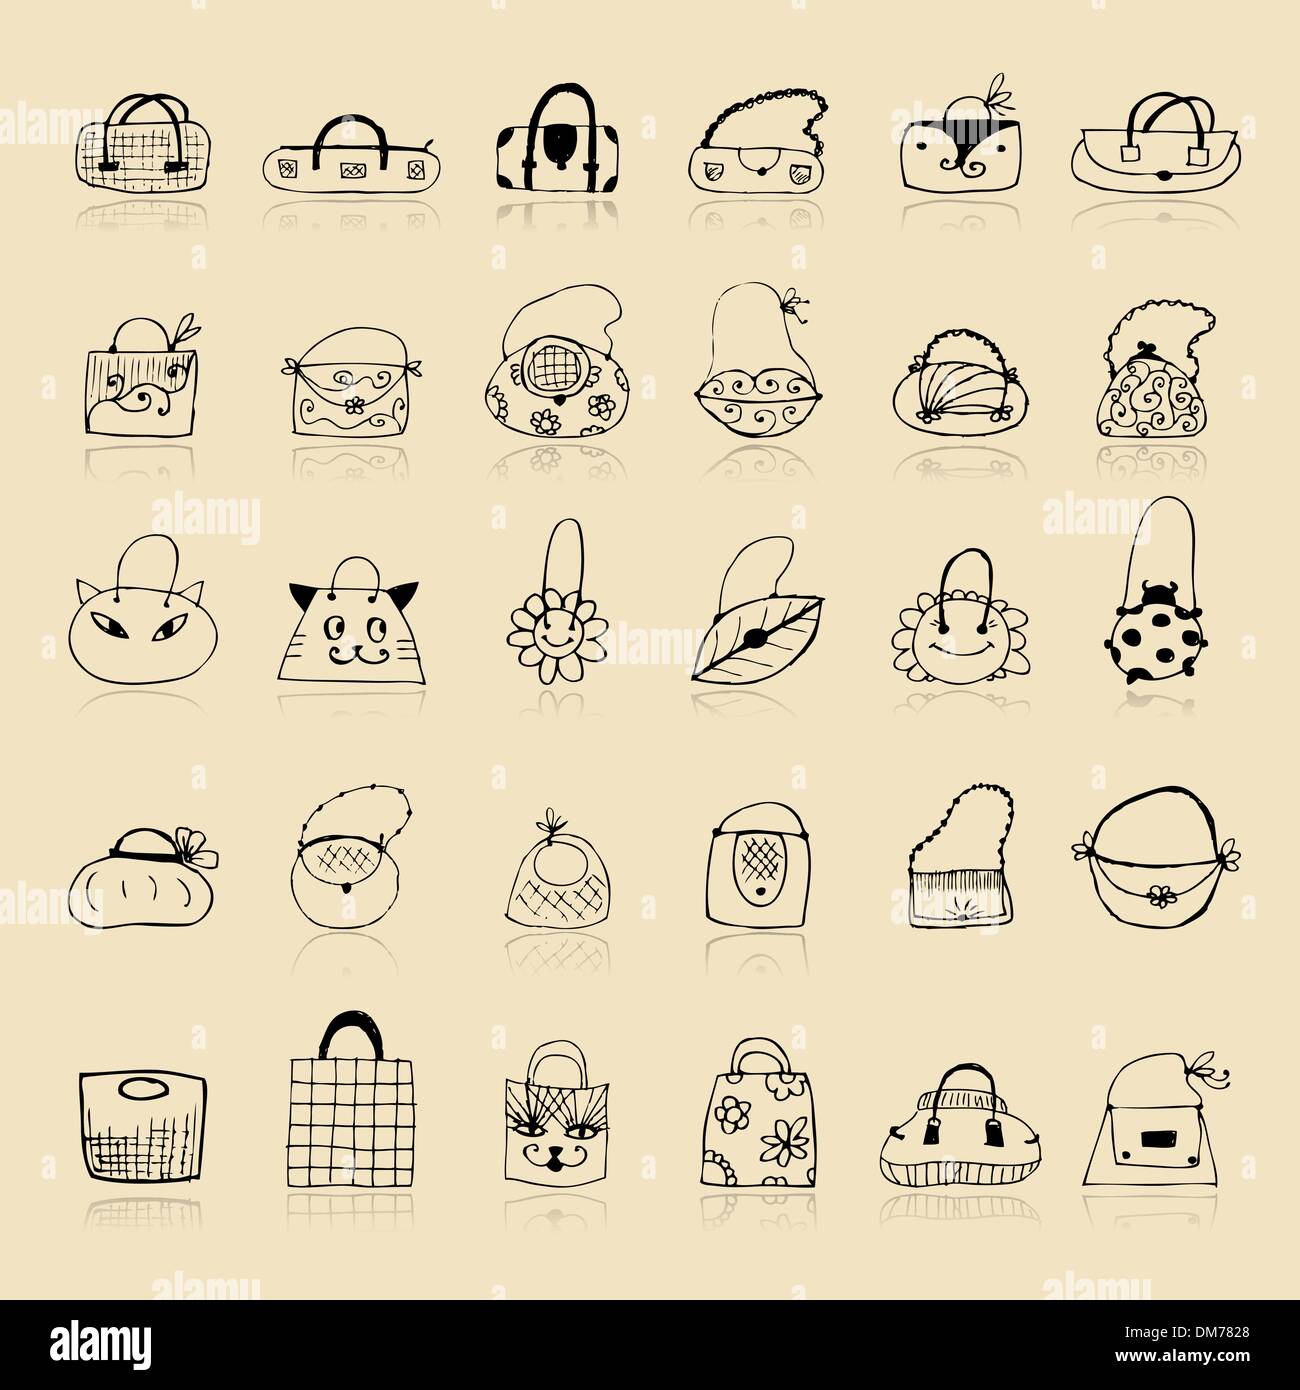 Bag Drawing Technical Vector Images (over 170)